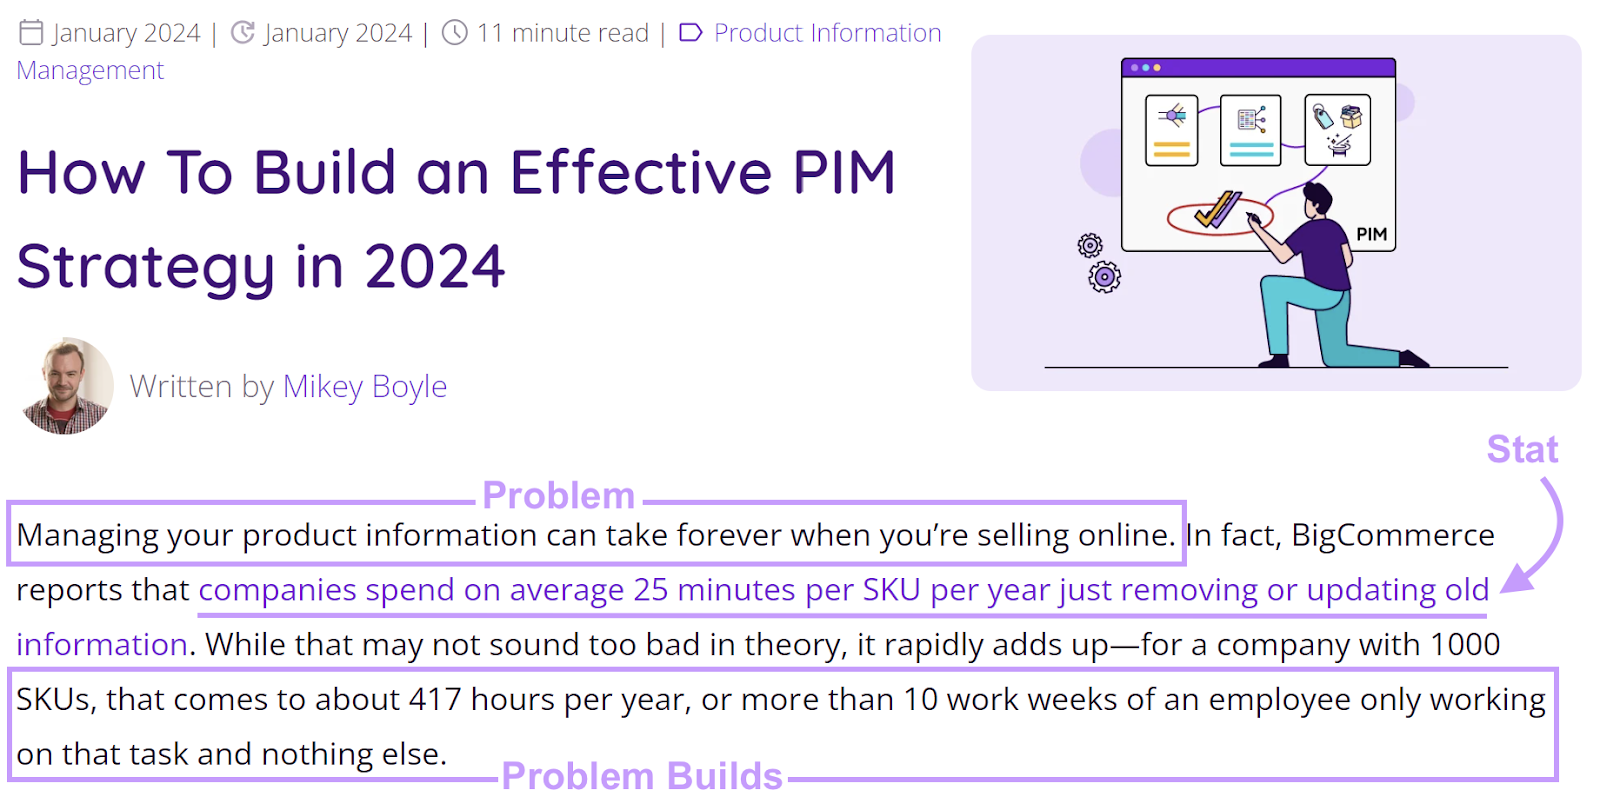 An introduction of Plytix’s blog on building an effective PIM strategy in 2024